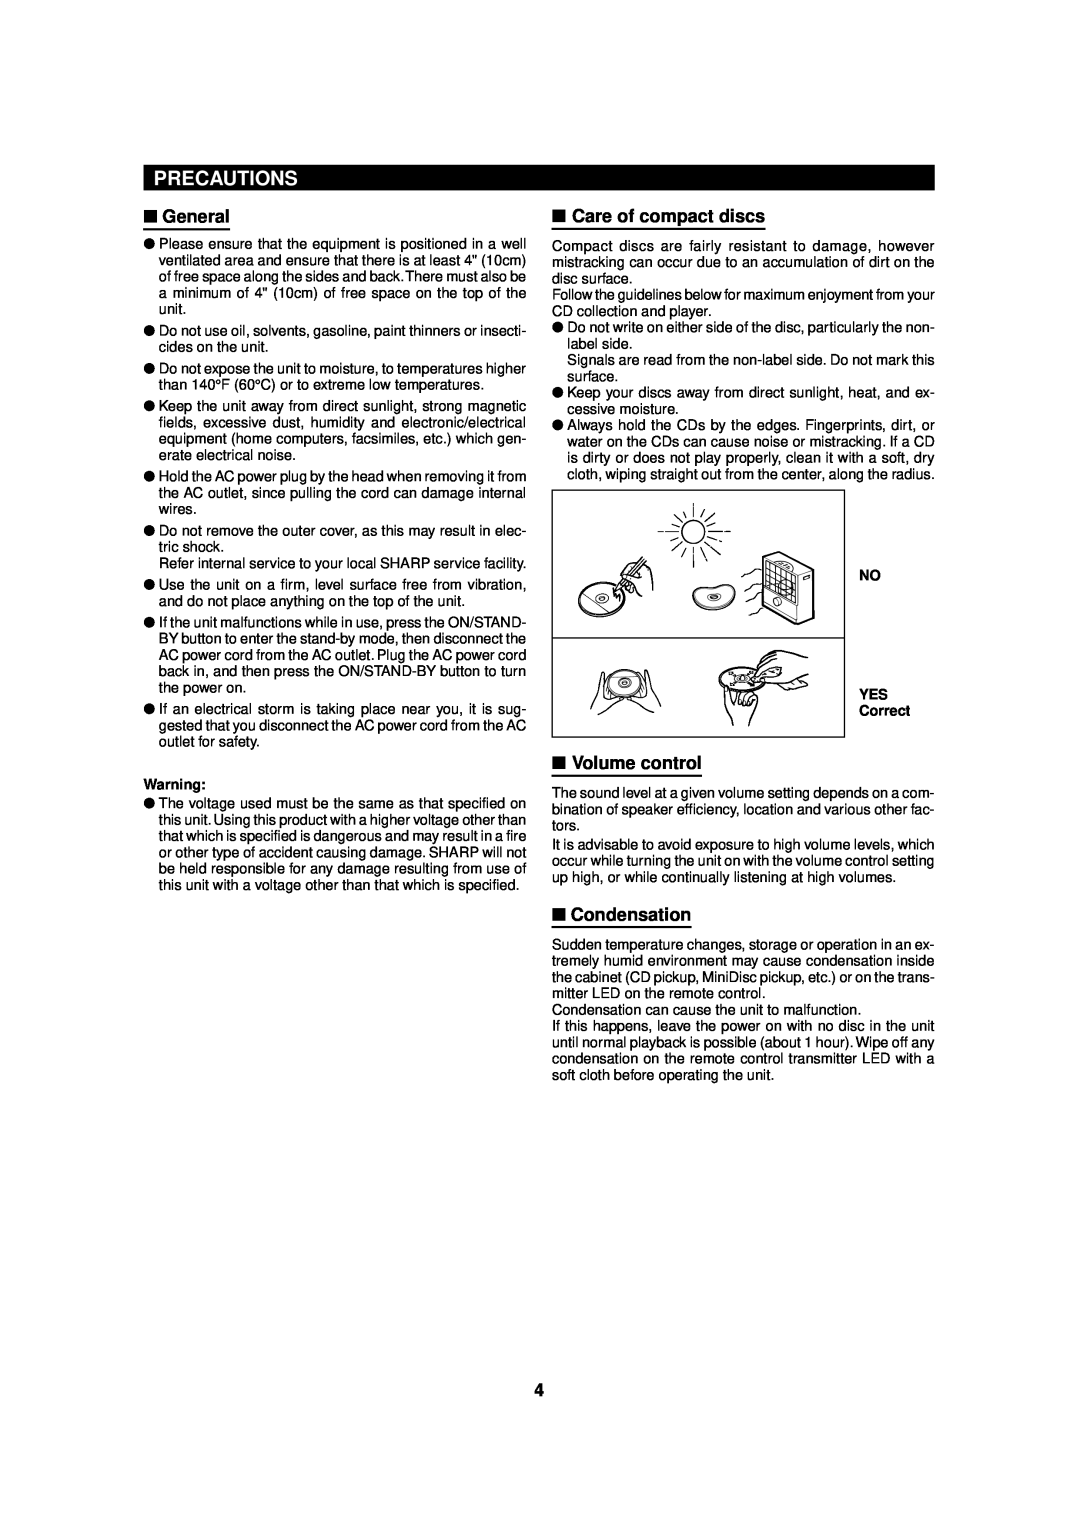 Sharp MD-MX20 operation manual Precautions, General, Care of compact discs, Volume control, Condensation 